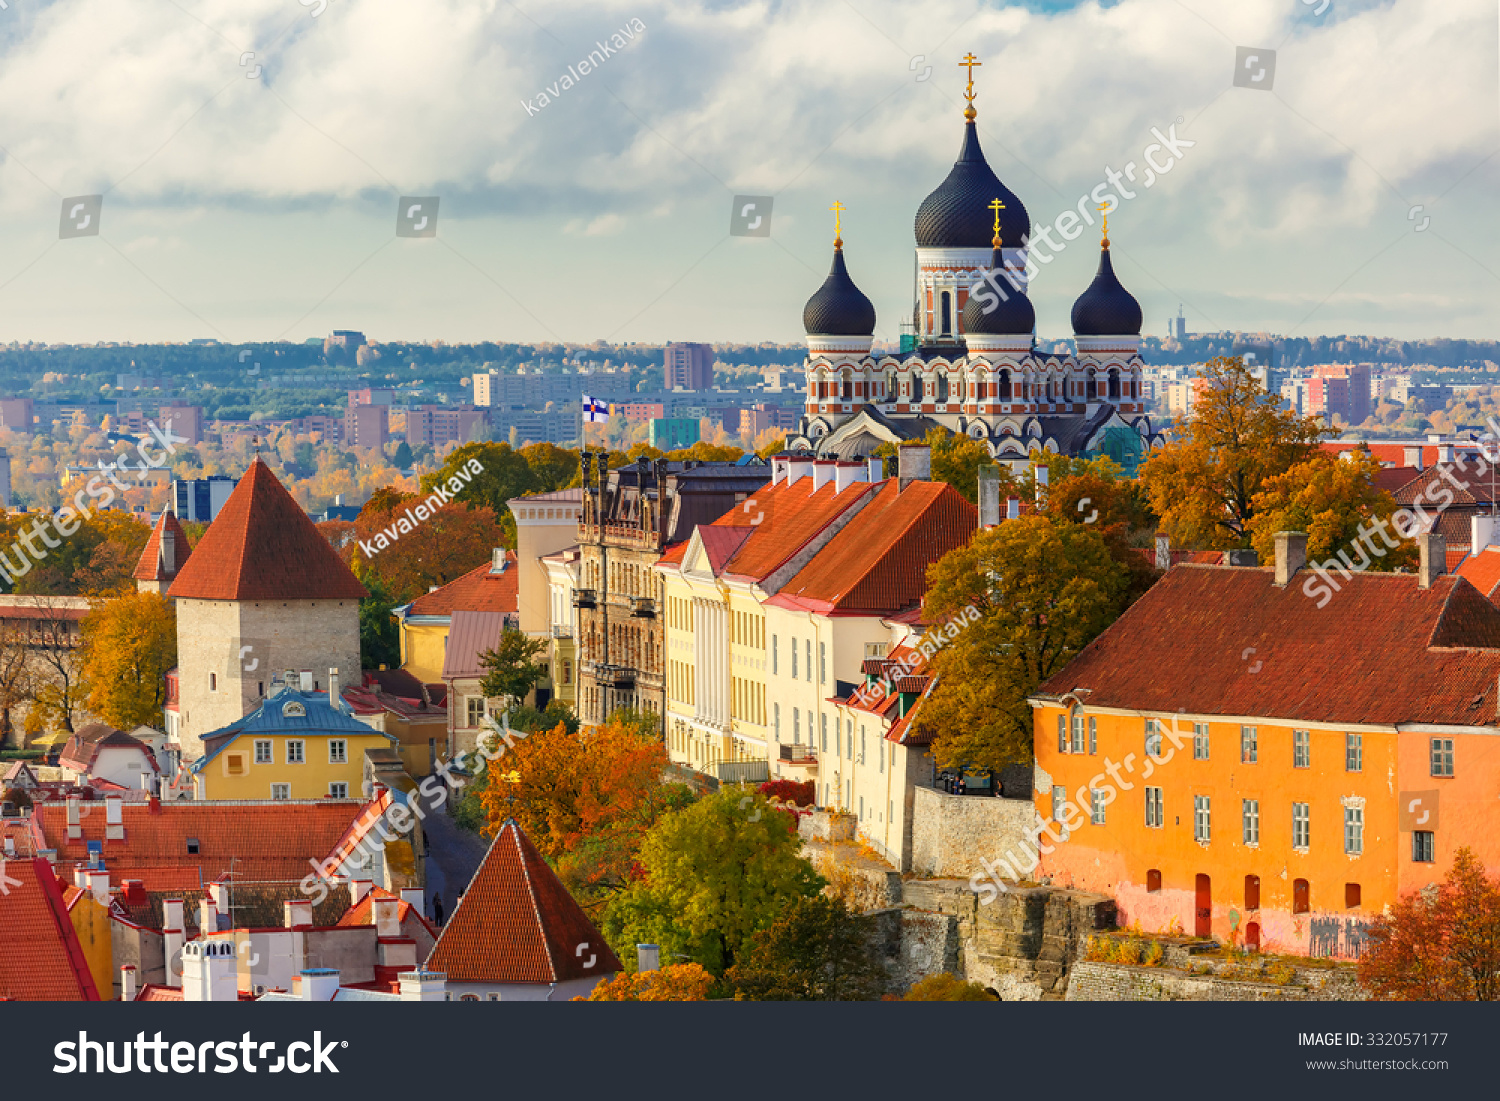 Toompea hill with fortress wall, tower and Russian Orthodox Alexander Nevsky Cathedral, view from the tower of St. Olaf church, Tallinn, Estonia #332057177